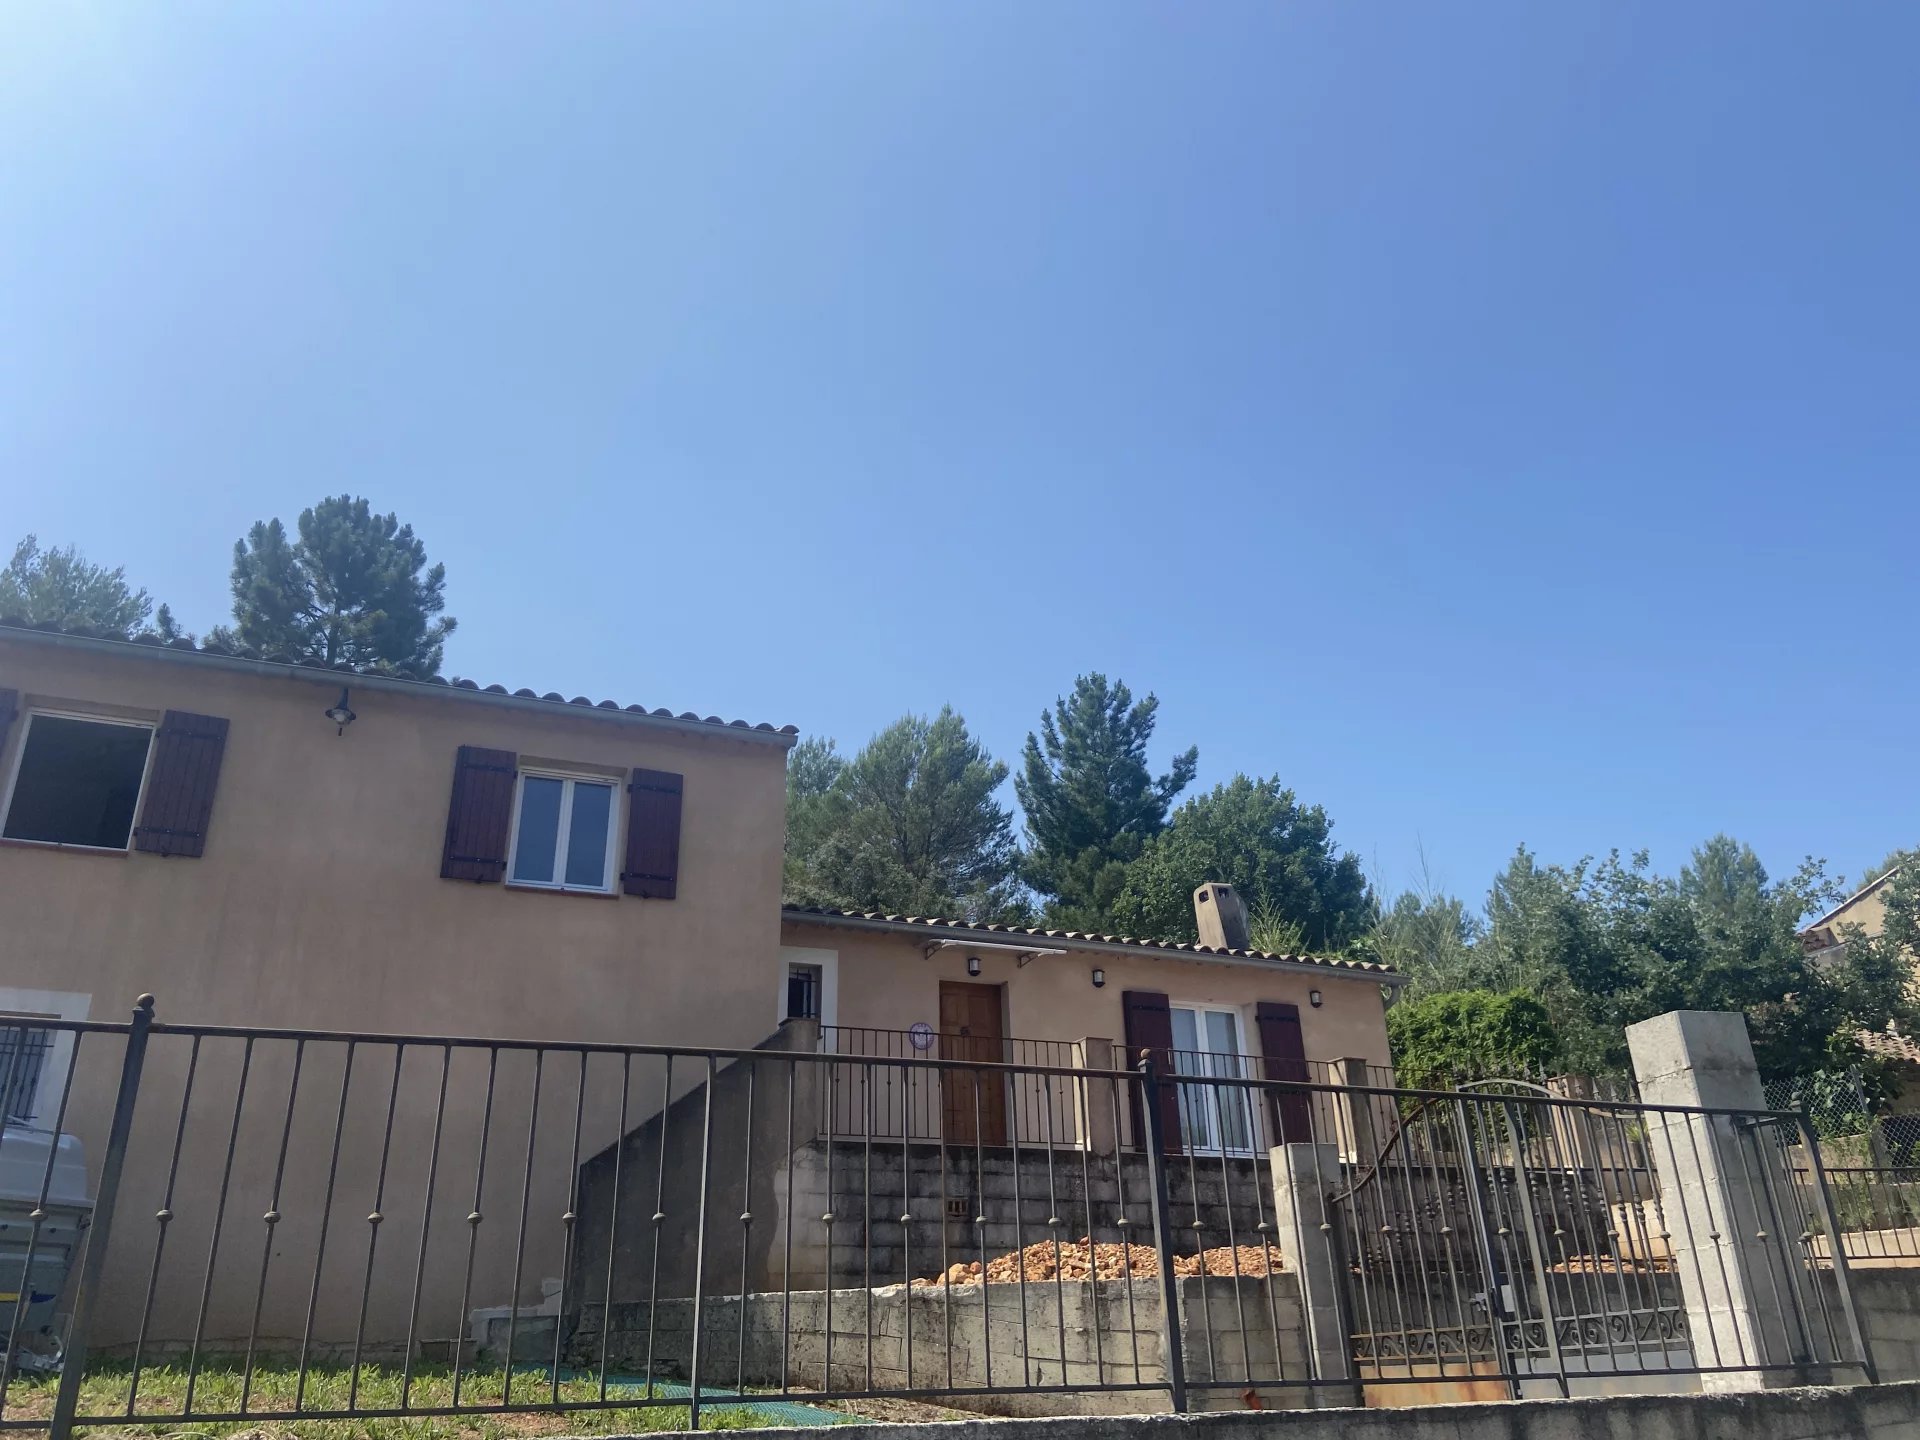 CABASSE-Villa 3 bedrooms with pool and garage